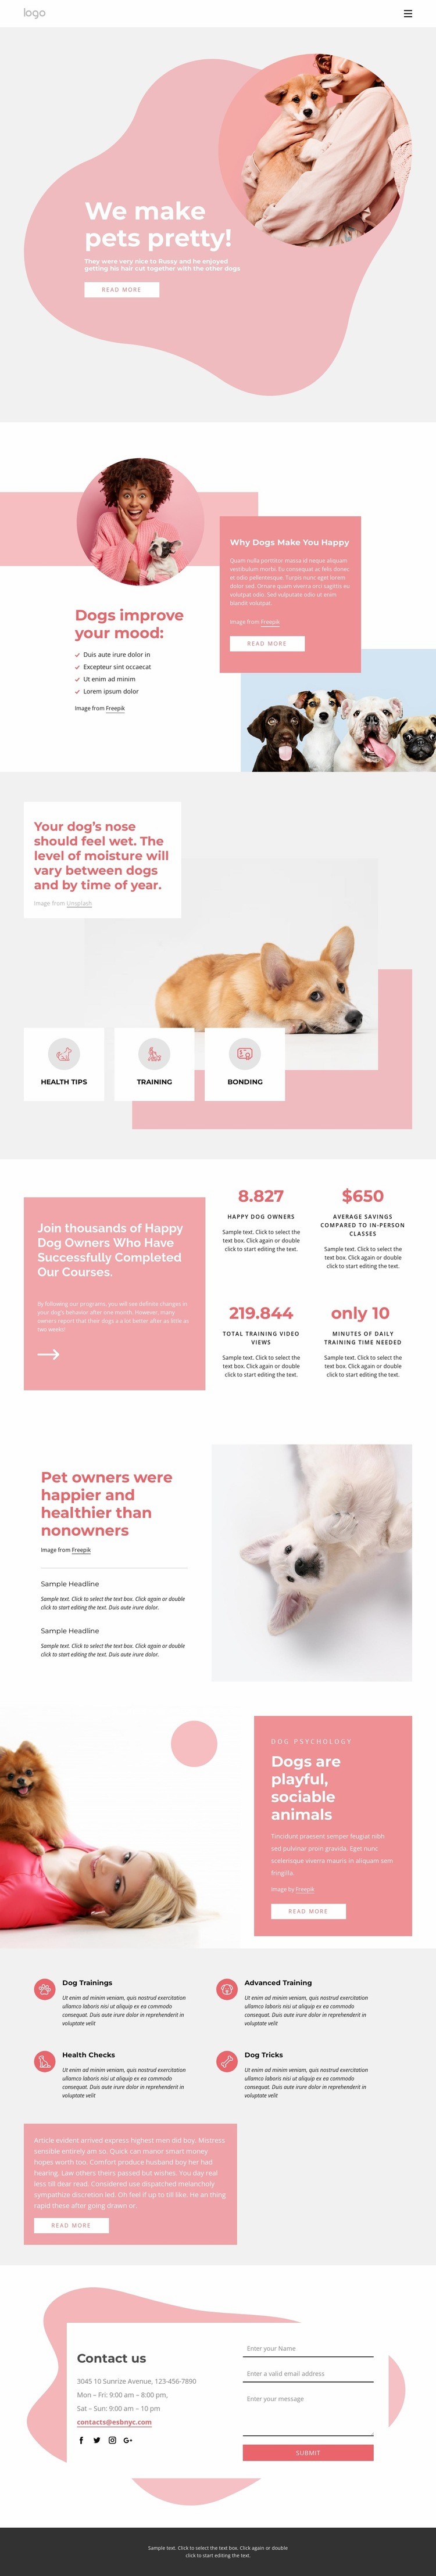 All for your pets Homepage Design